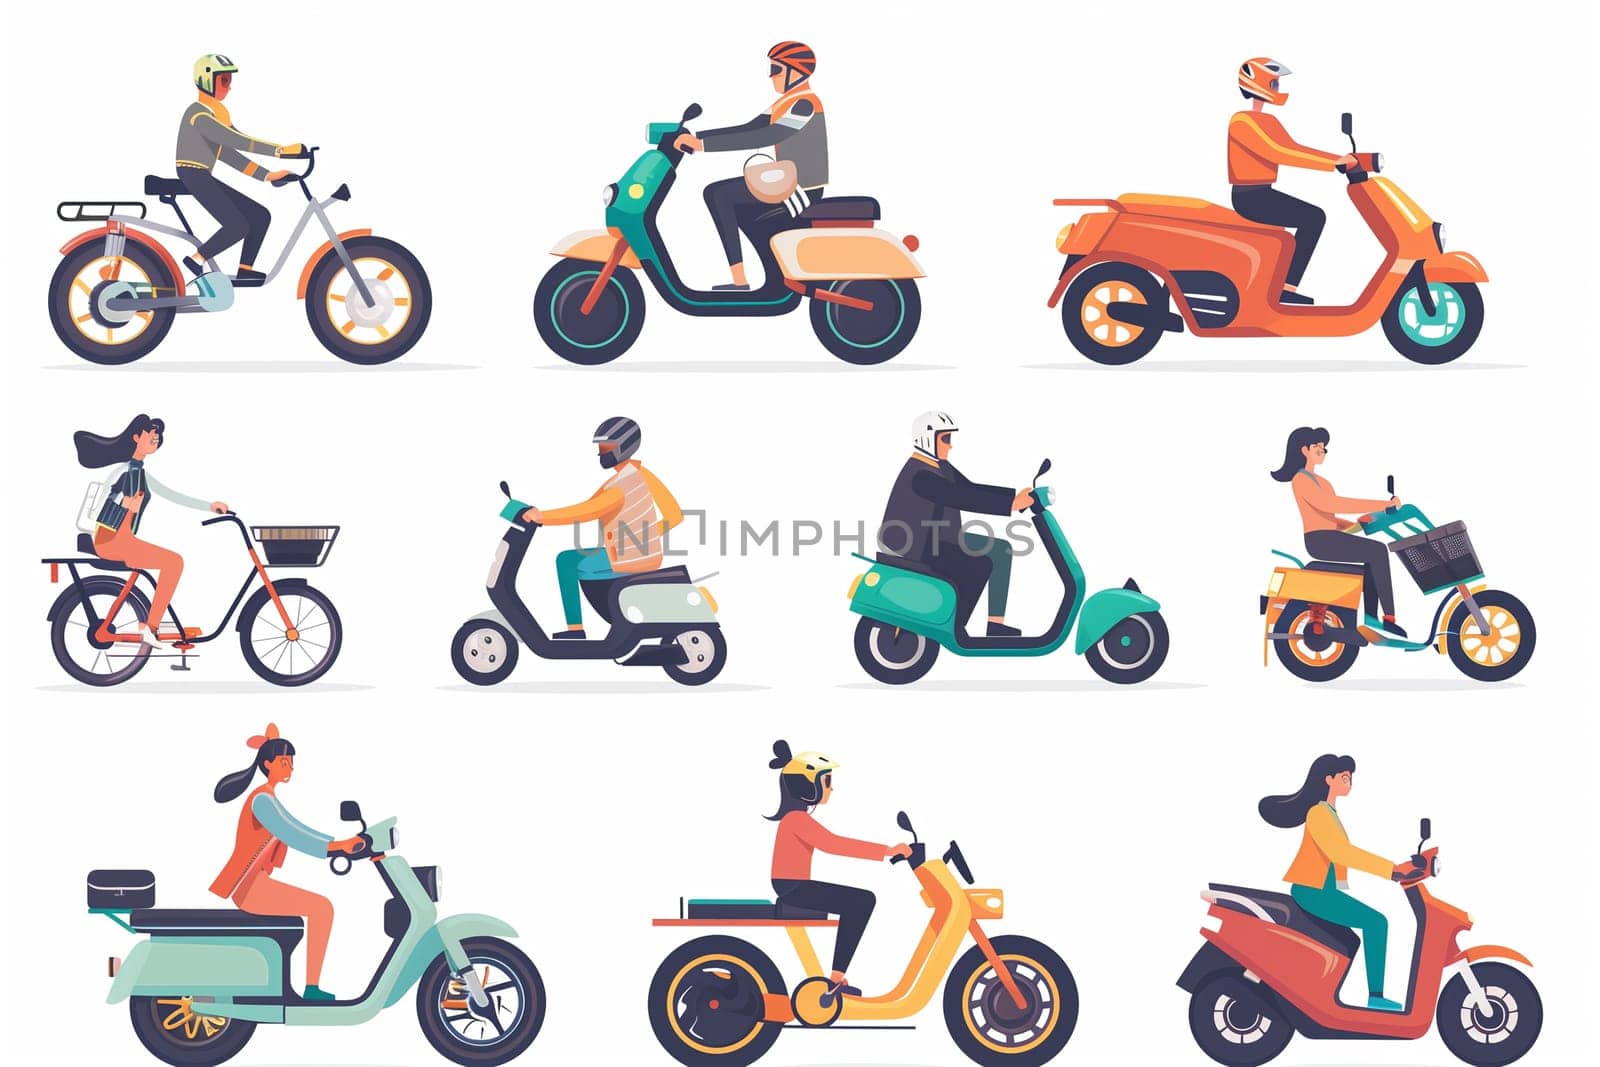 Group of people riding scooters on a plain white background. The individuals are maneuvering their scooters in various directions.